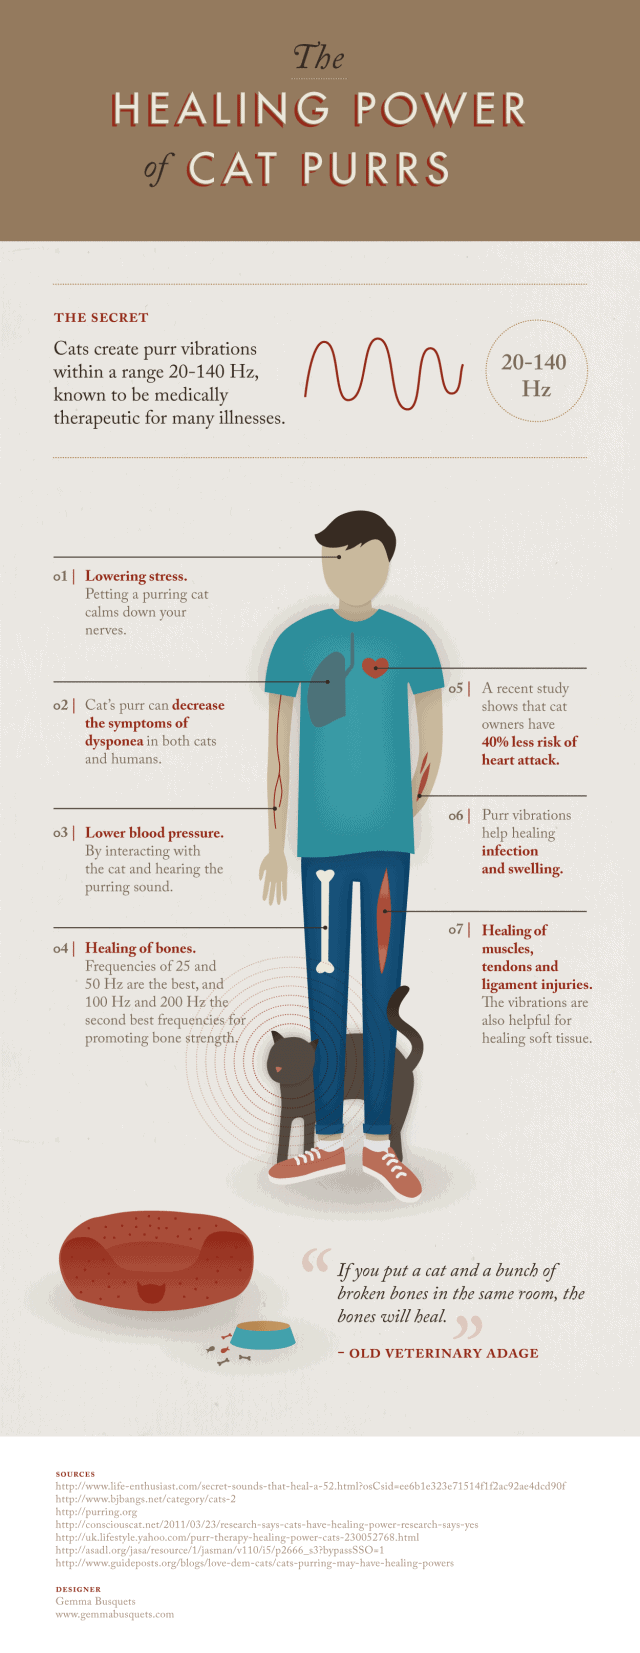 How can owning a cat improve a person's health?